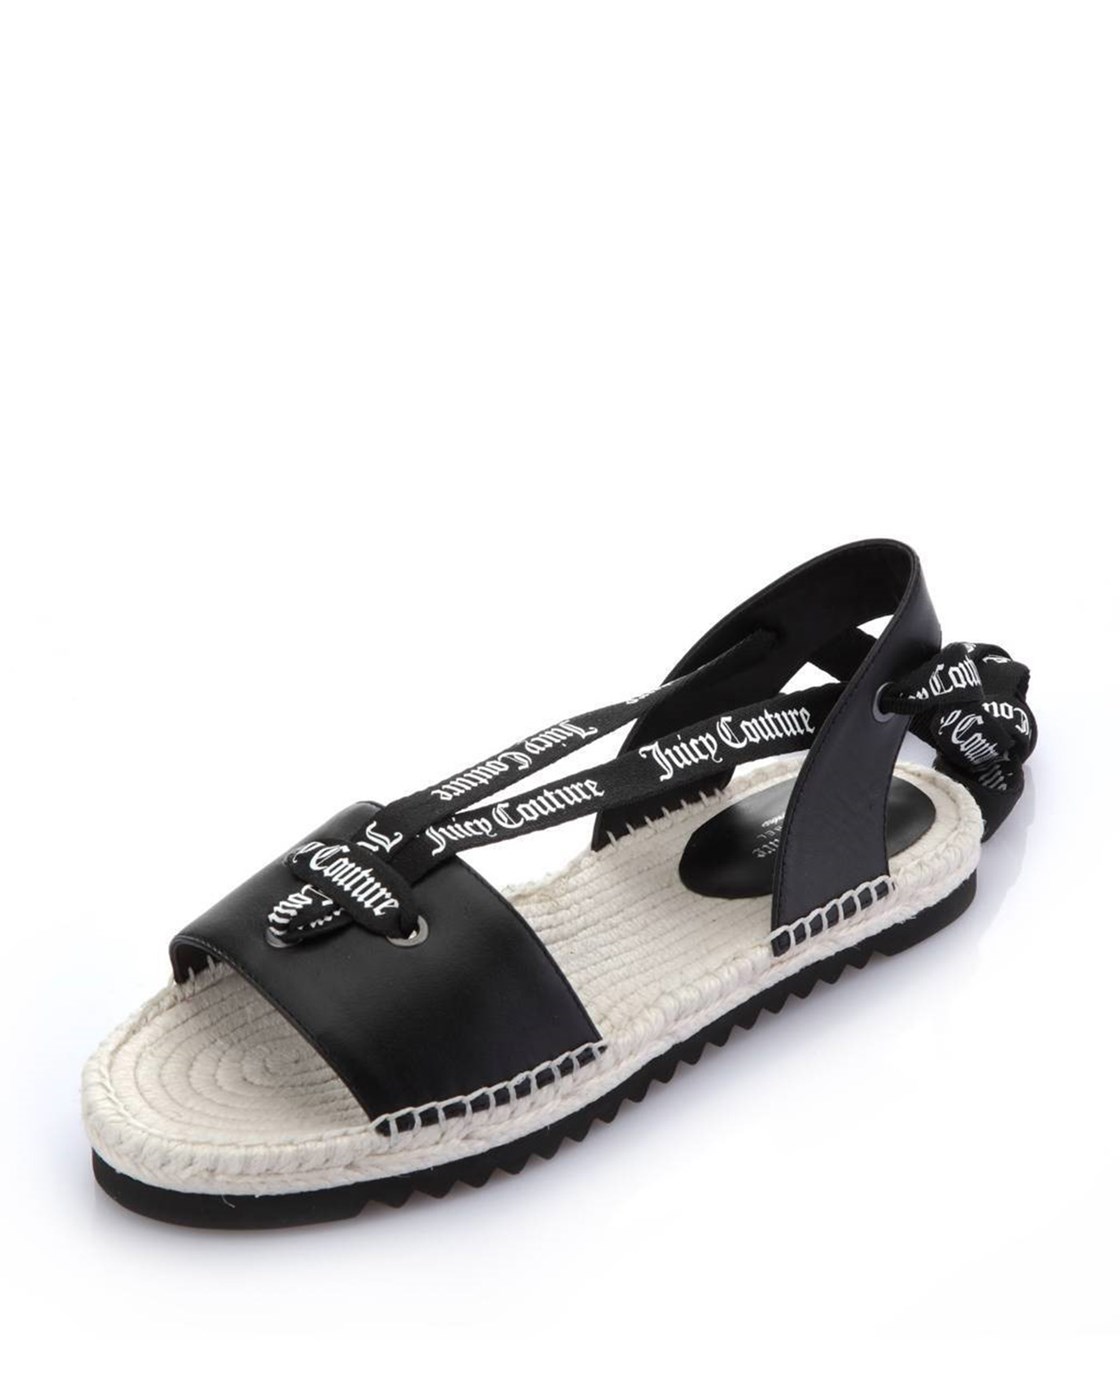 Juicy Couture Fay Leather Espadrille Sandal